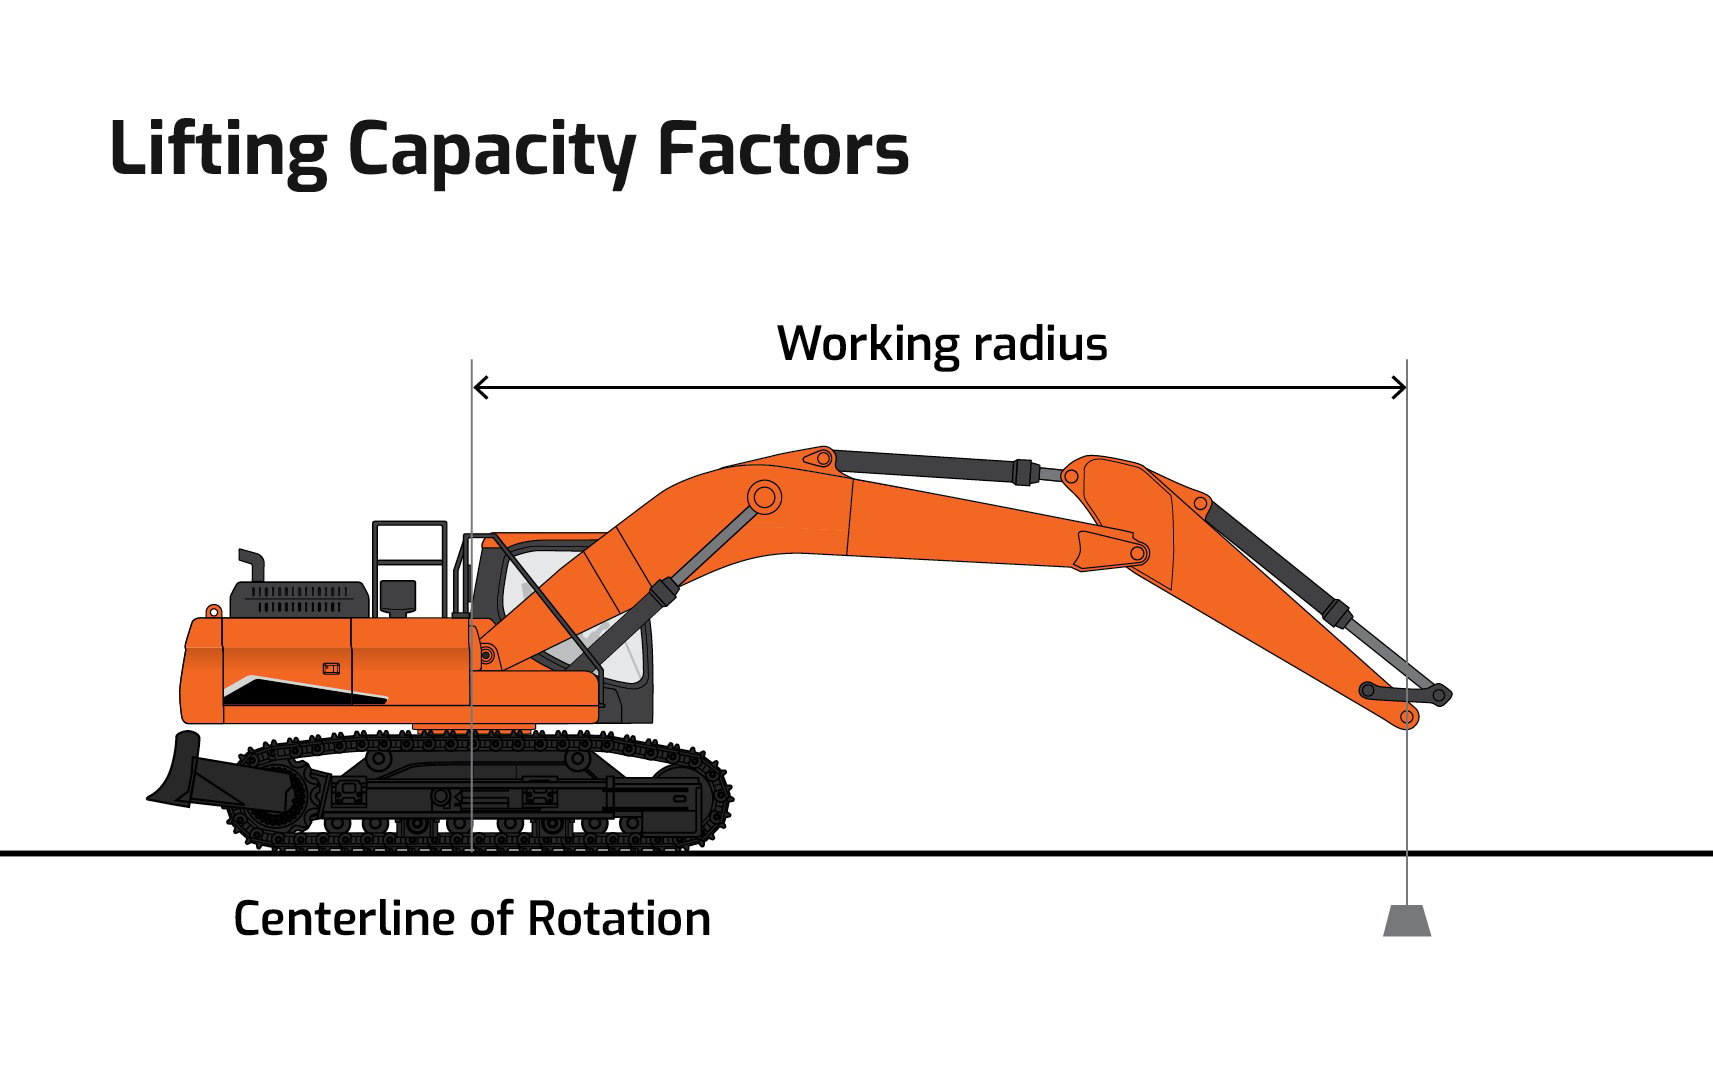 Working radius and centerline of rotation pertaining to lifting with an excavator.